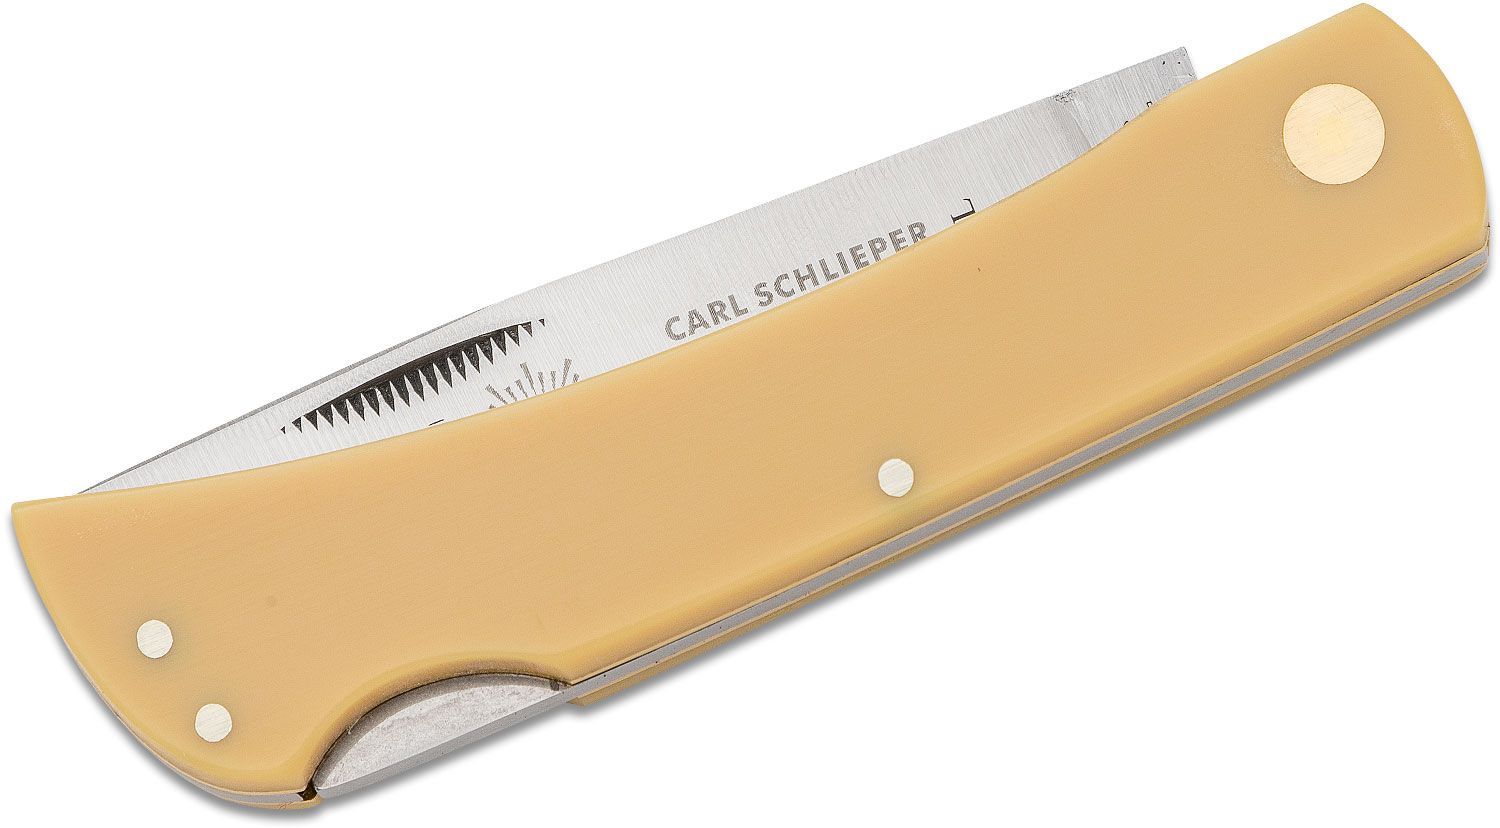 GERMAN EYE BRAND - CLODBUSTER {LARGE} ETCHED BLADE - 4 5/8 CLOSED LENGTH -  YELLOW SYNTHETIC